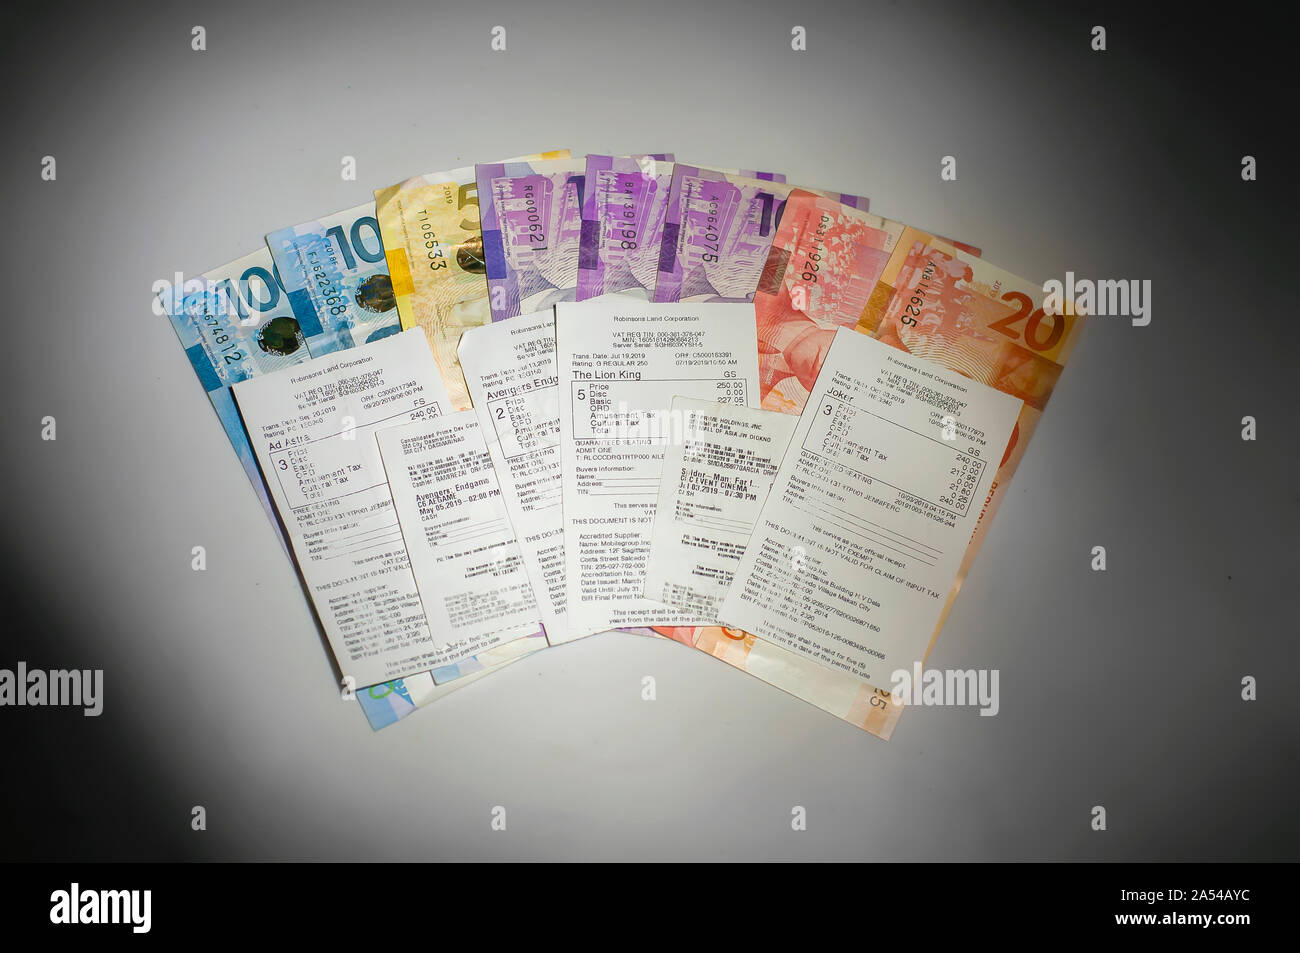 Various Admit One Movie Tickets of Famous Blockbusters of 2019. Movie Tickets placed at the top of Philippine peso bills.  Philippine Peso currency Stock Photo